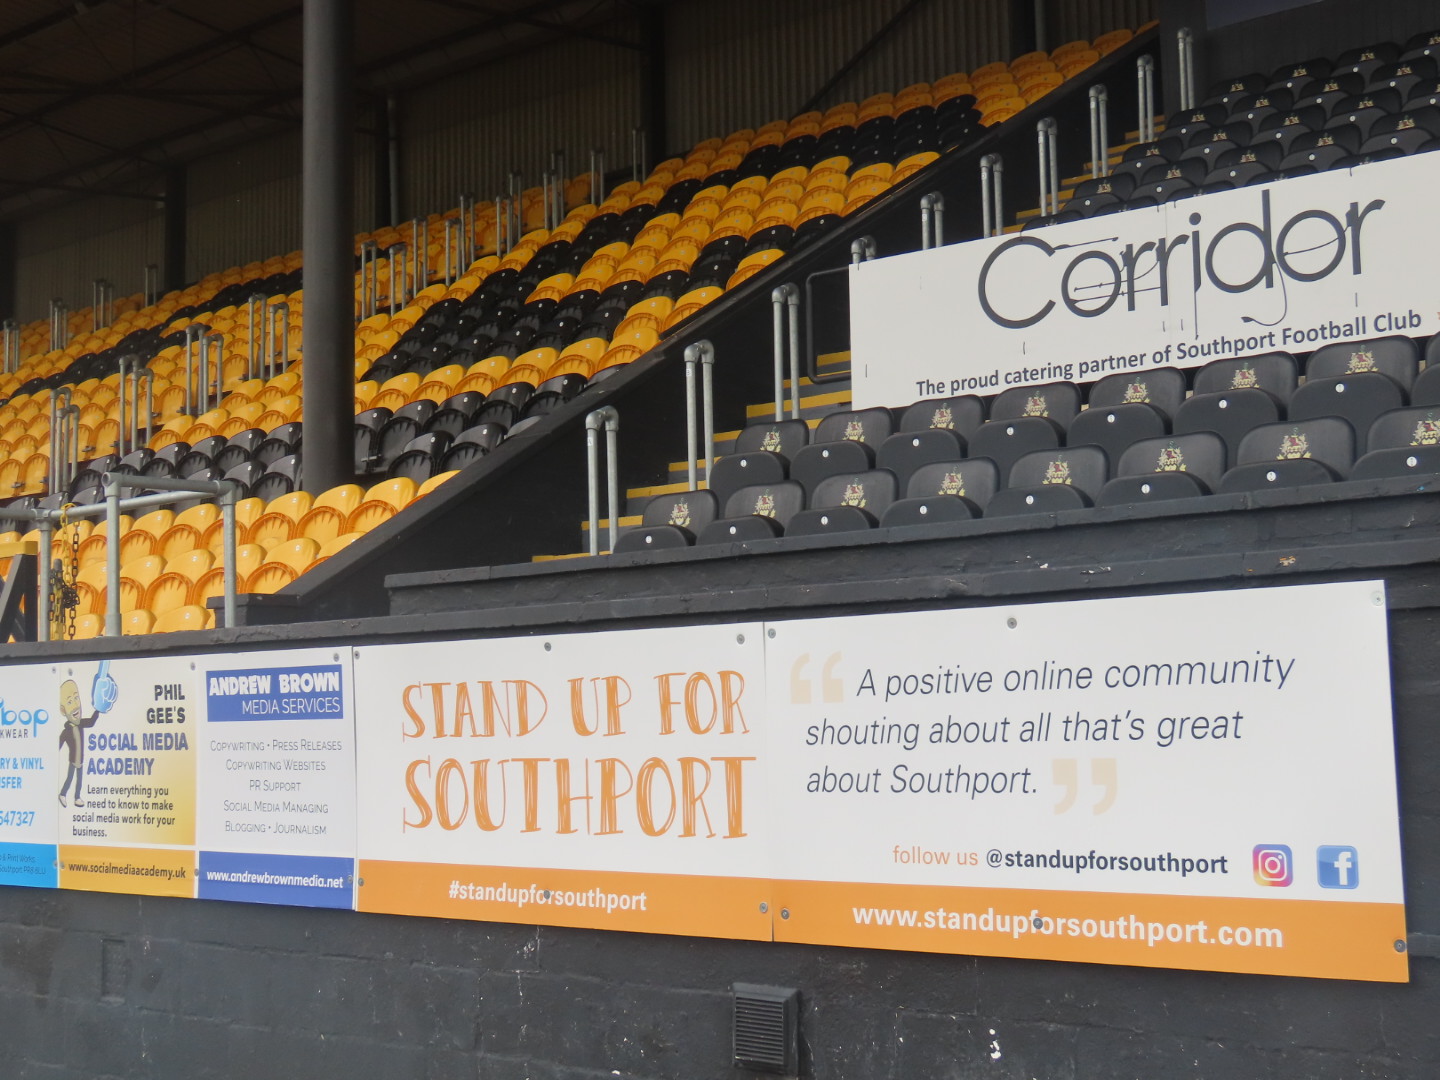 The Stand Up For Southport advertising board at Southport FC. Photo by Andrew Brown Media